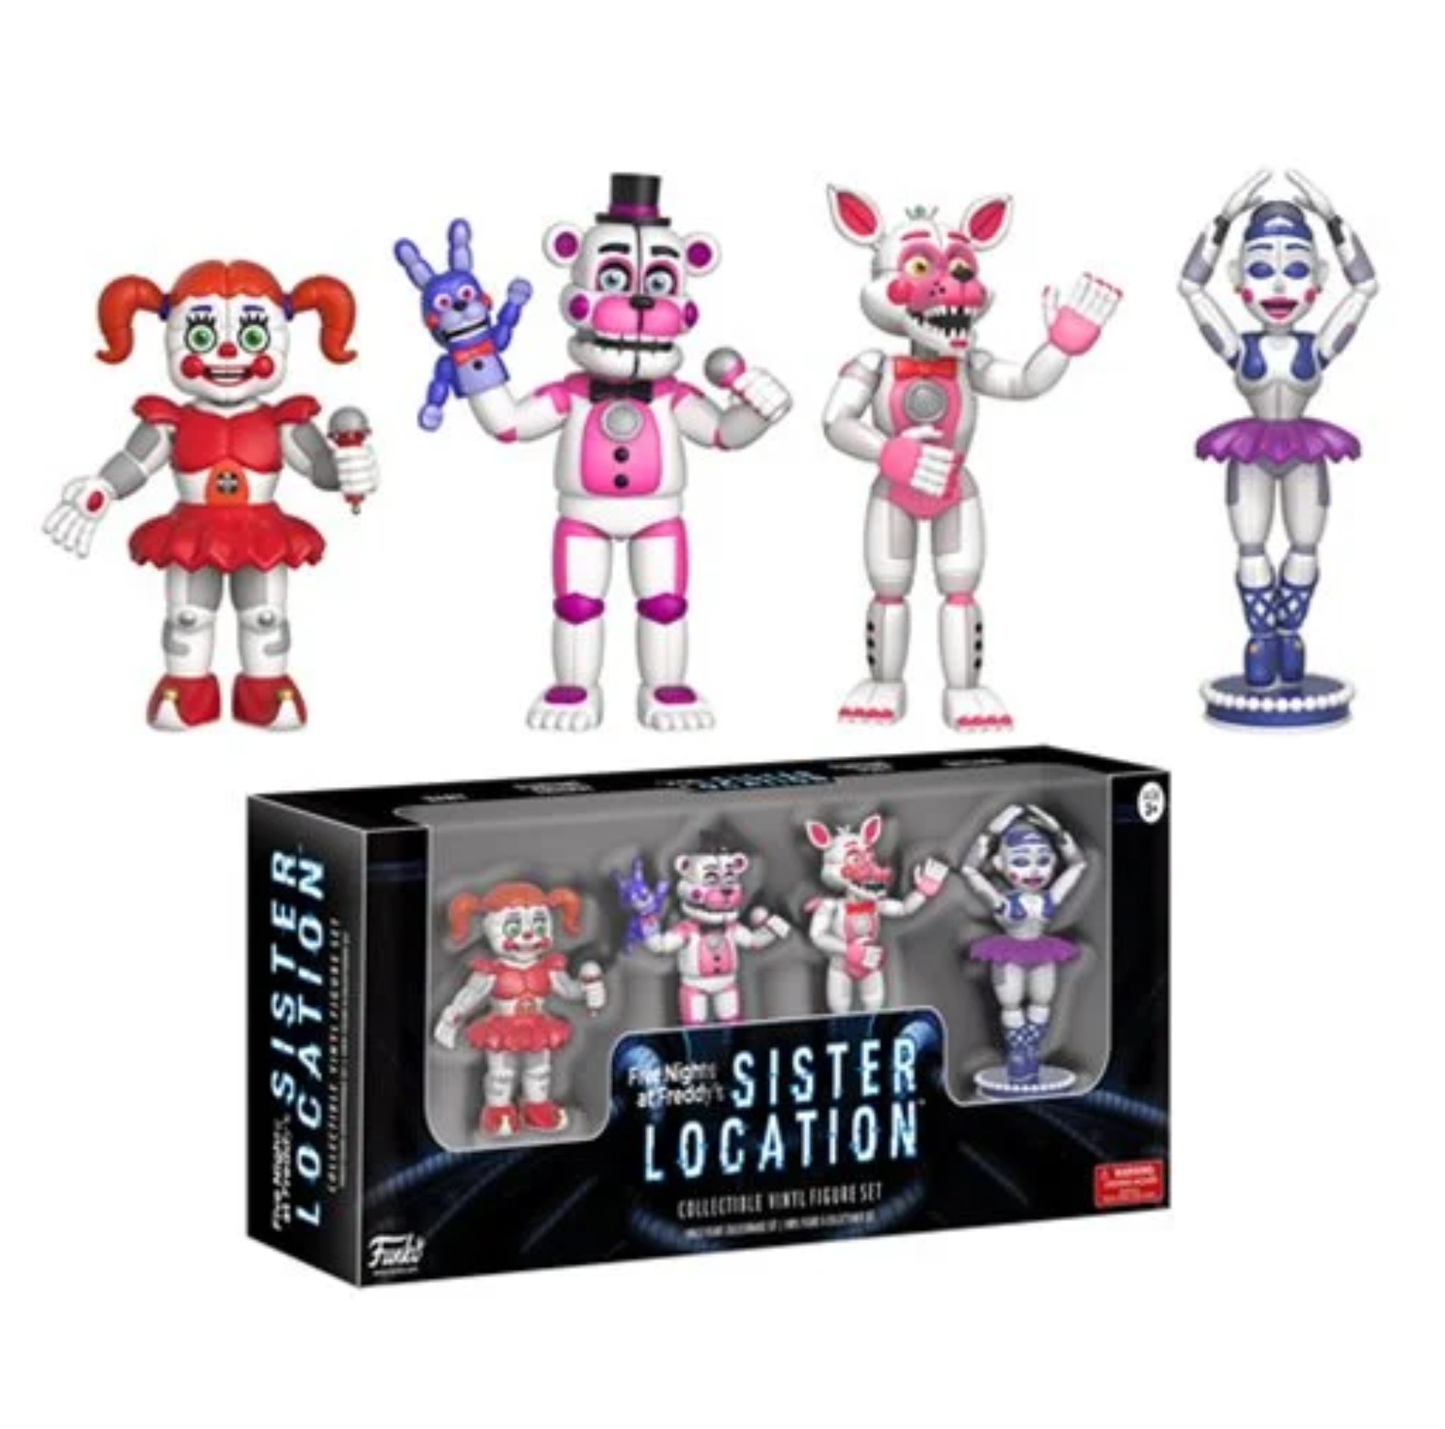 Five Nights at Freddy's Sister Location 2-Inch Collectors Edition Vinyl Figure Set